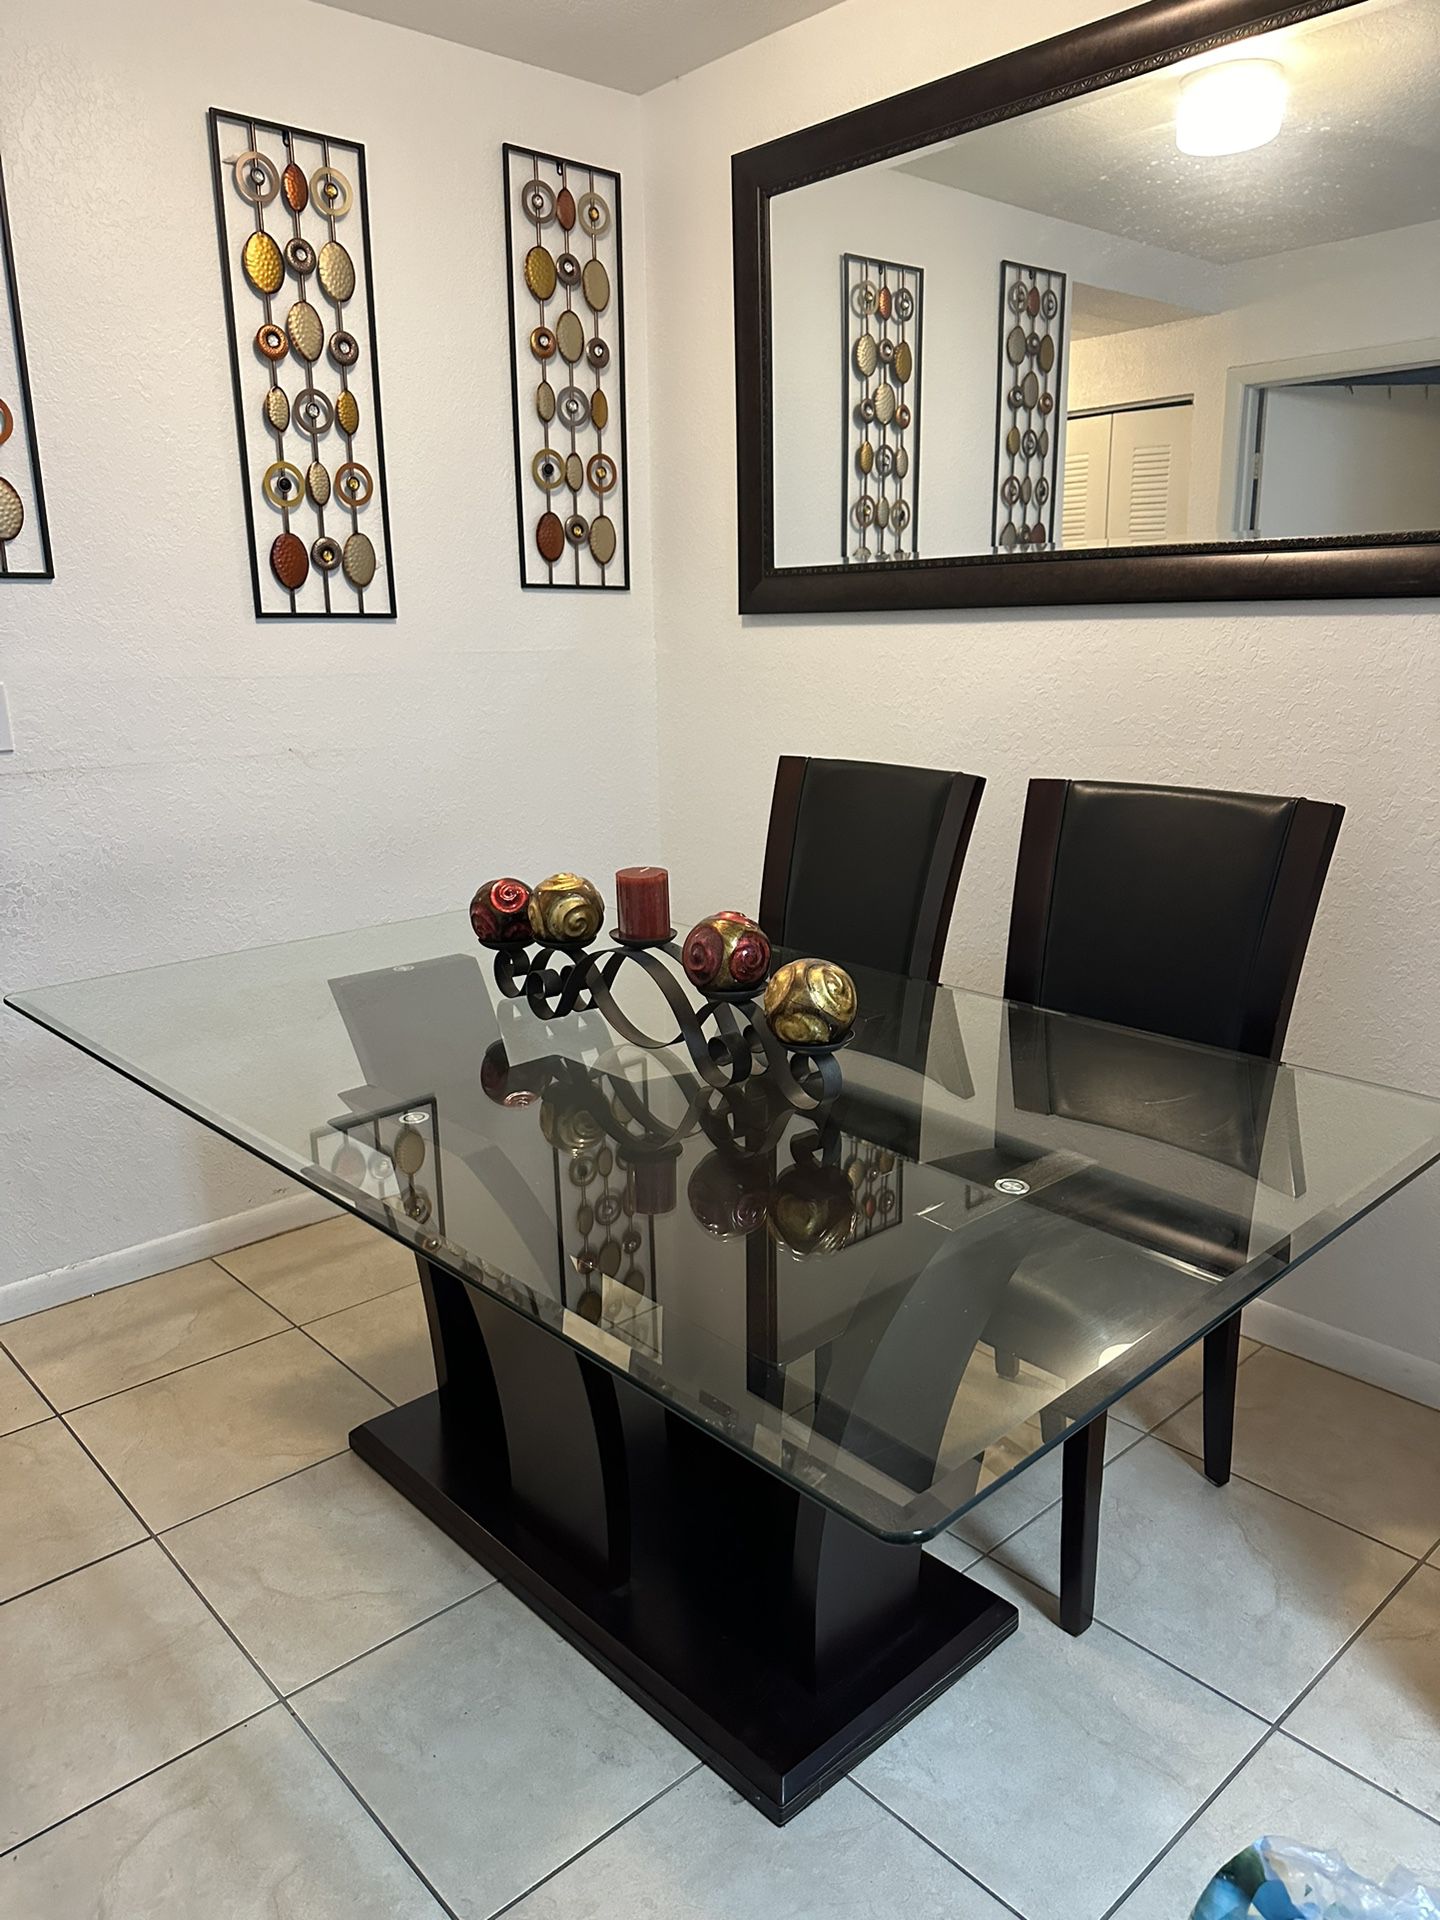 8 Piece dining table!